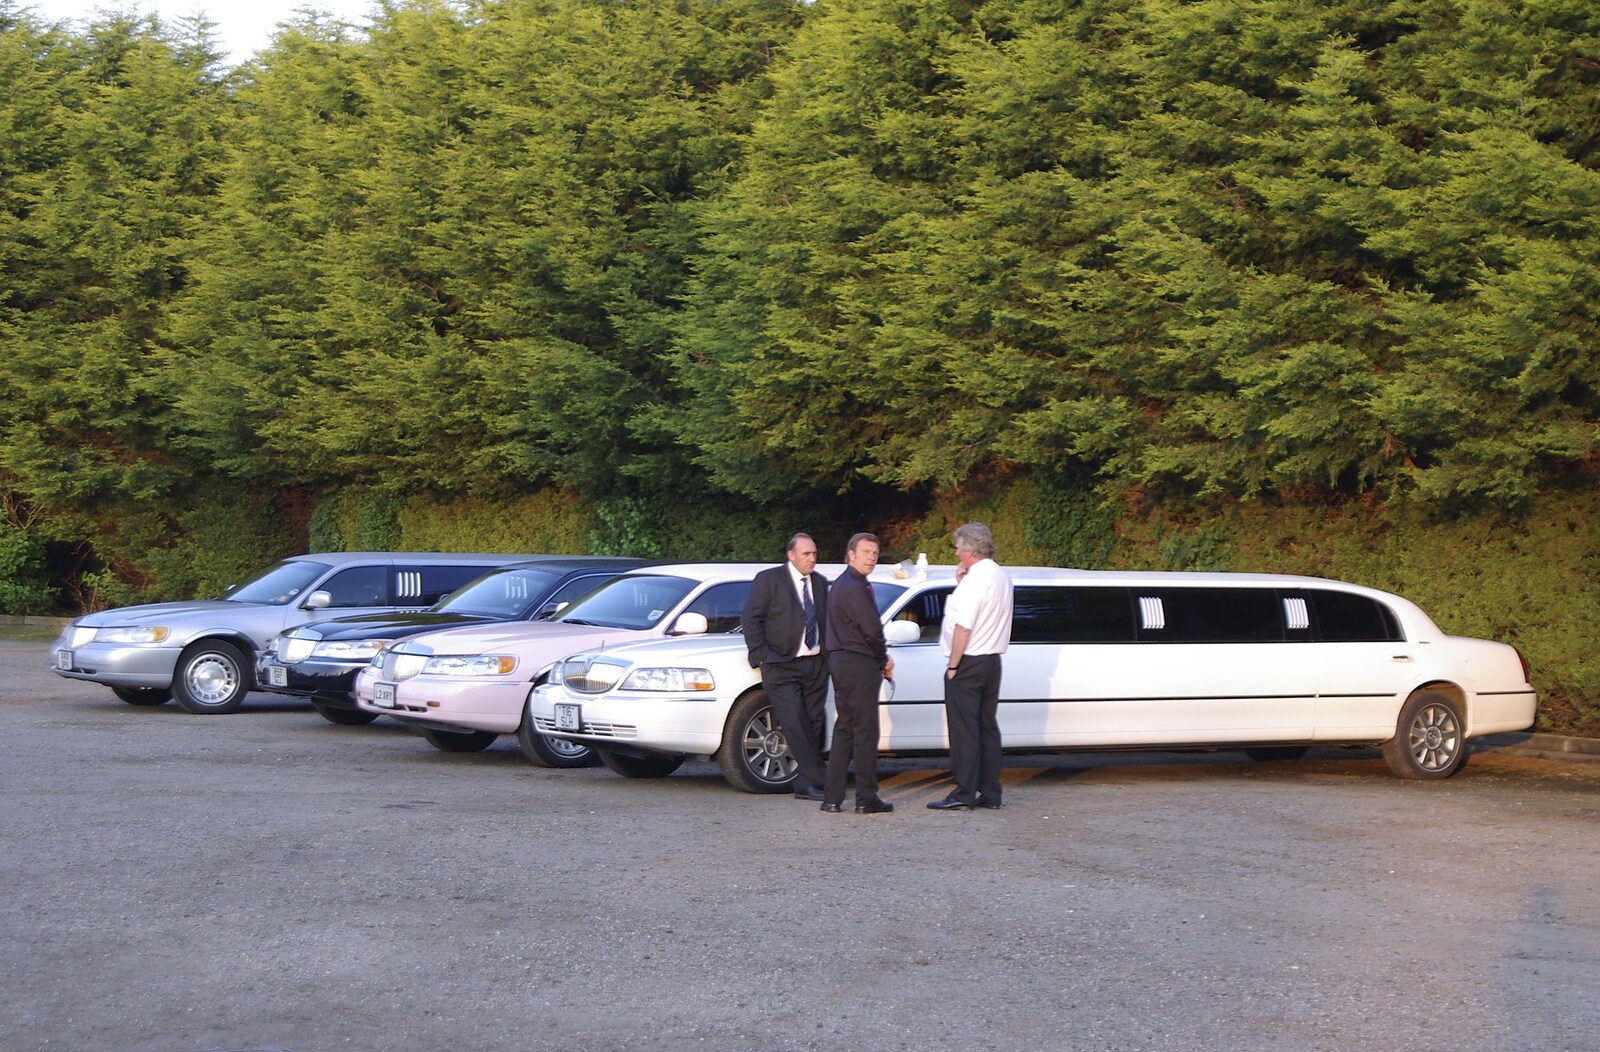 The BBs and Diss High School Leavers 07, Banham, Norfolk - 2nd June 2007: Back at the Appleyard, a heap of stretched limos park up for the night